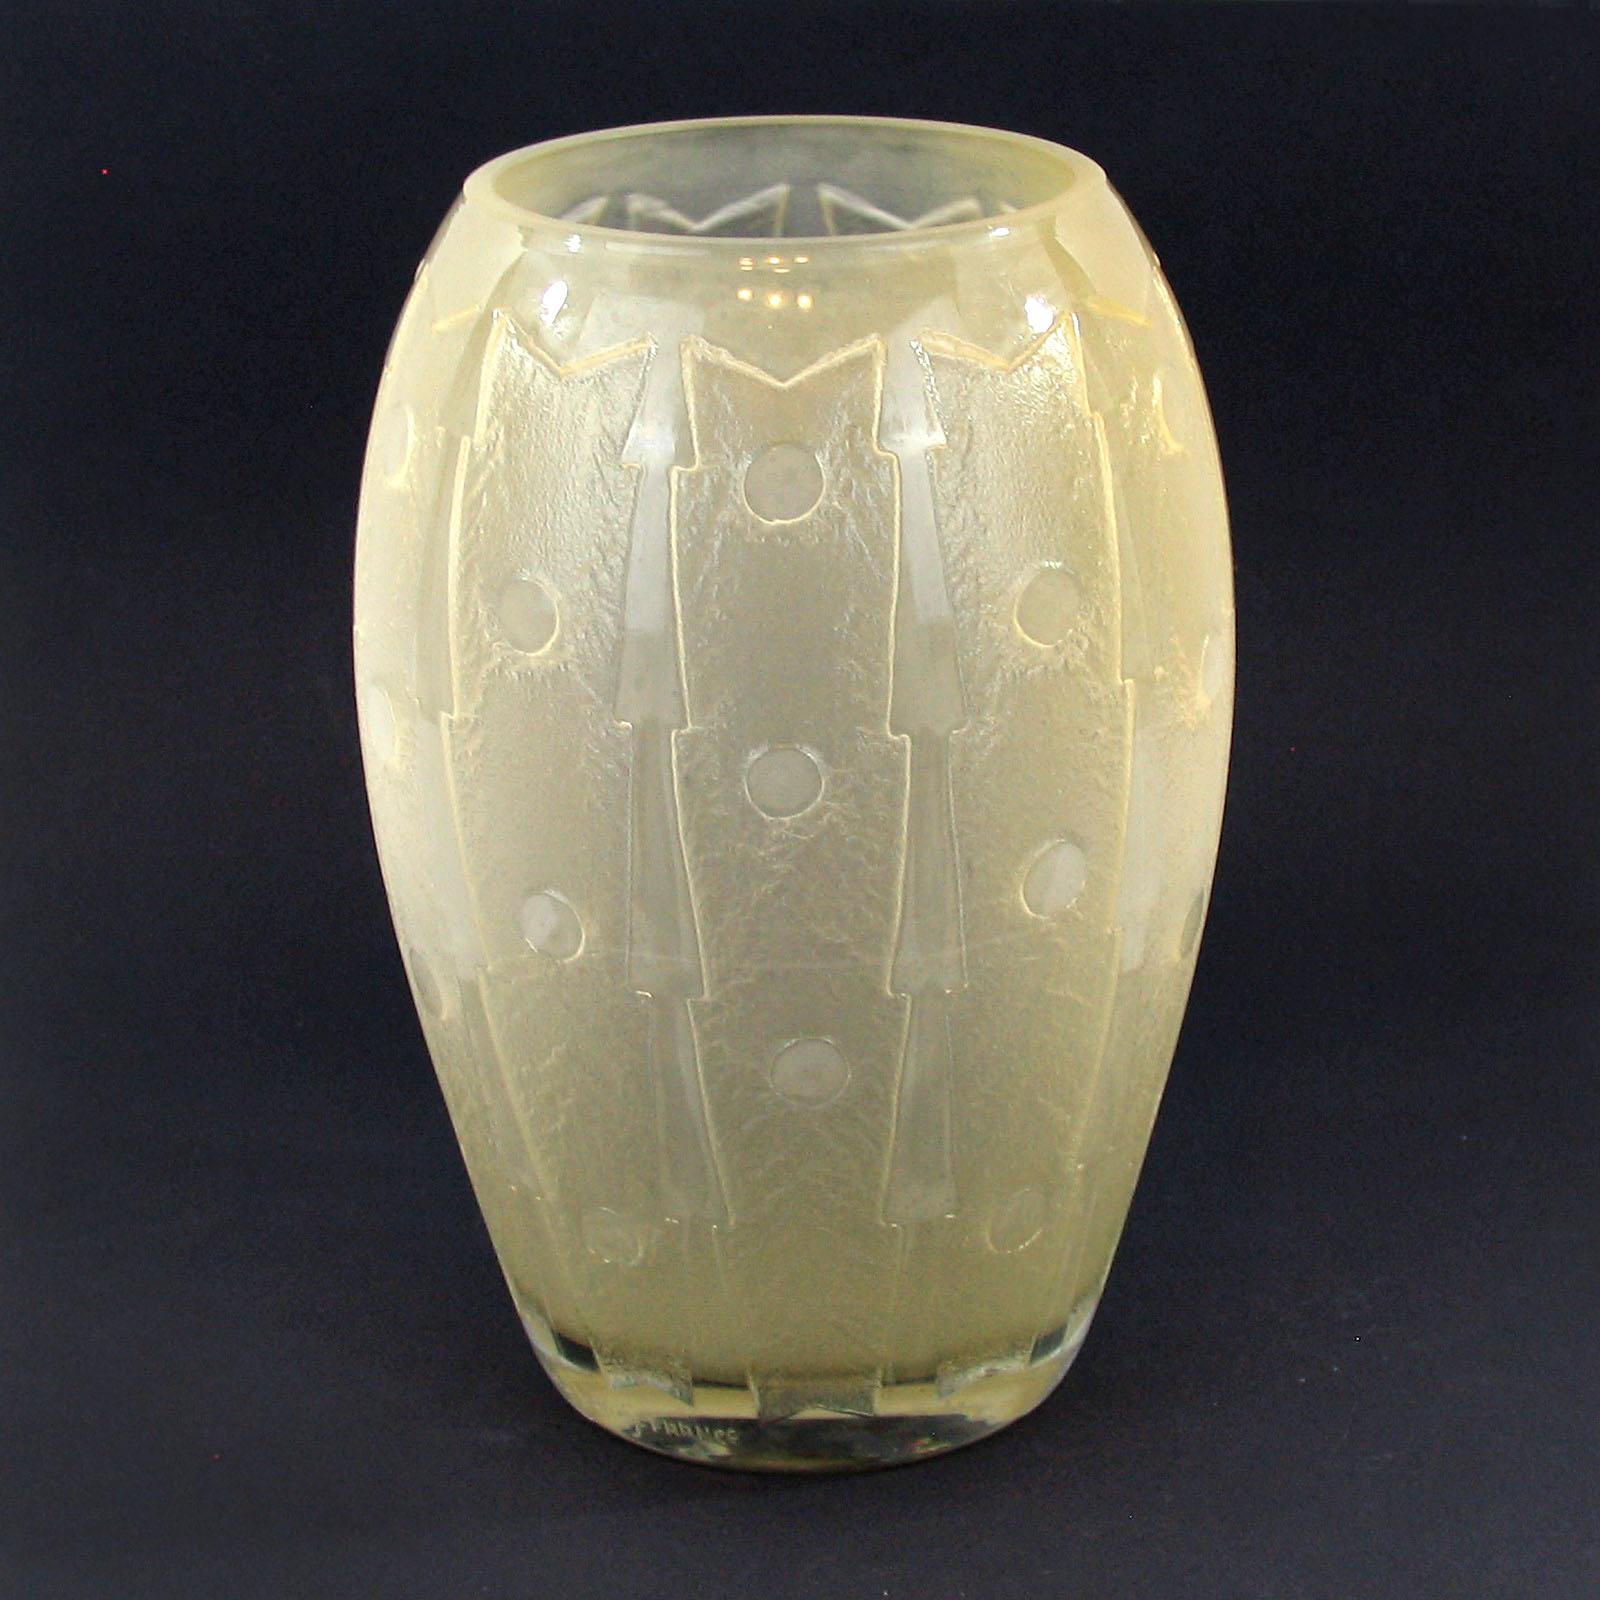 Art Deco large daum nancy etched glass vase, France, 1930s.
Large glass vase with acid cut geometric motif. Signed lower Daum Nancy France with the cross of Loraine.
Measure: height 28.5 cm.